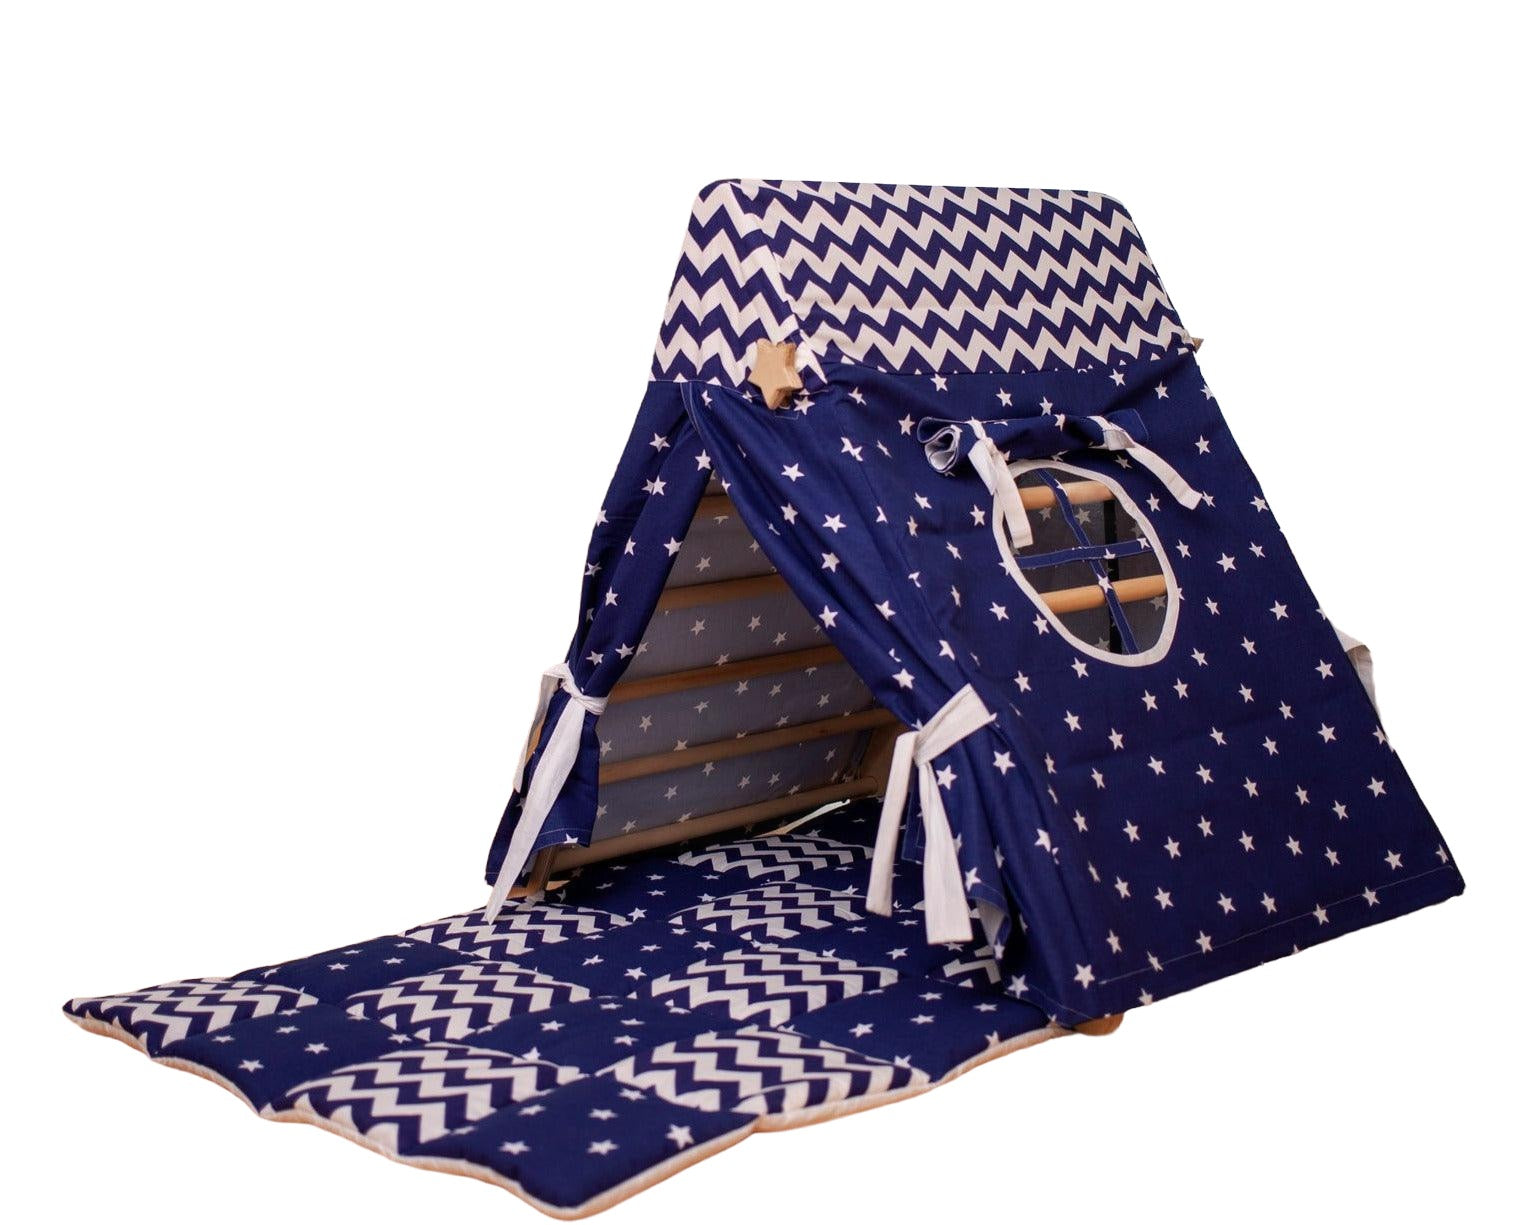 Climbing Triangle With Tent Cover, Mat, Ramp